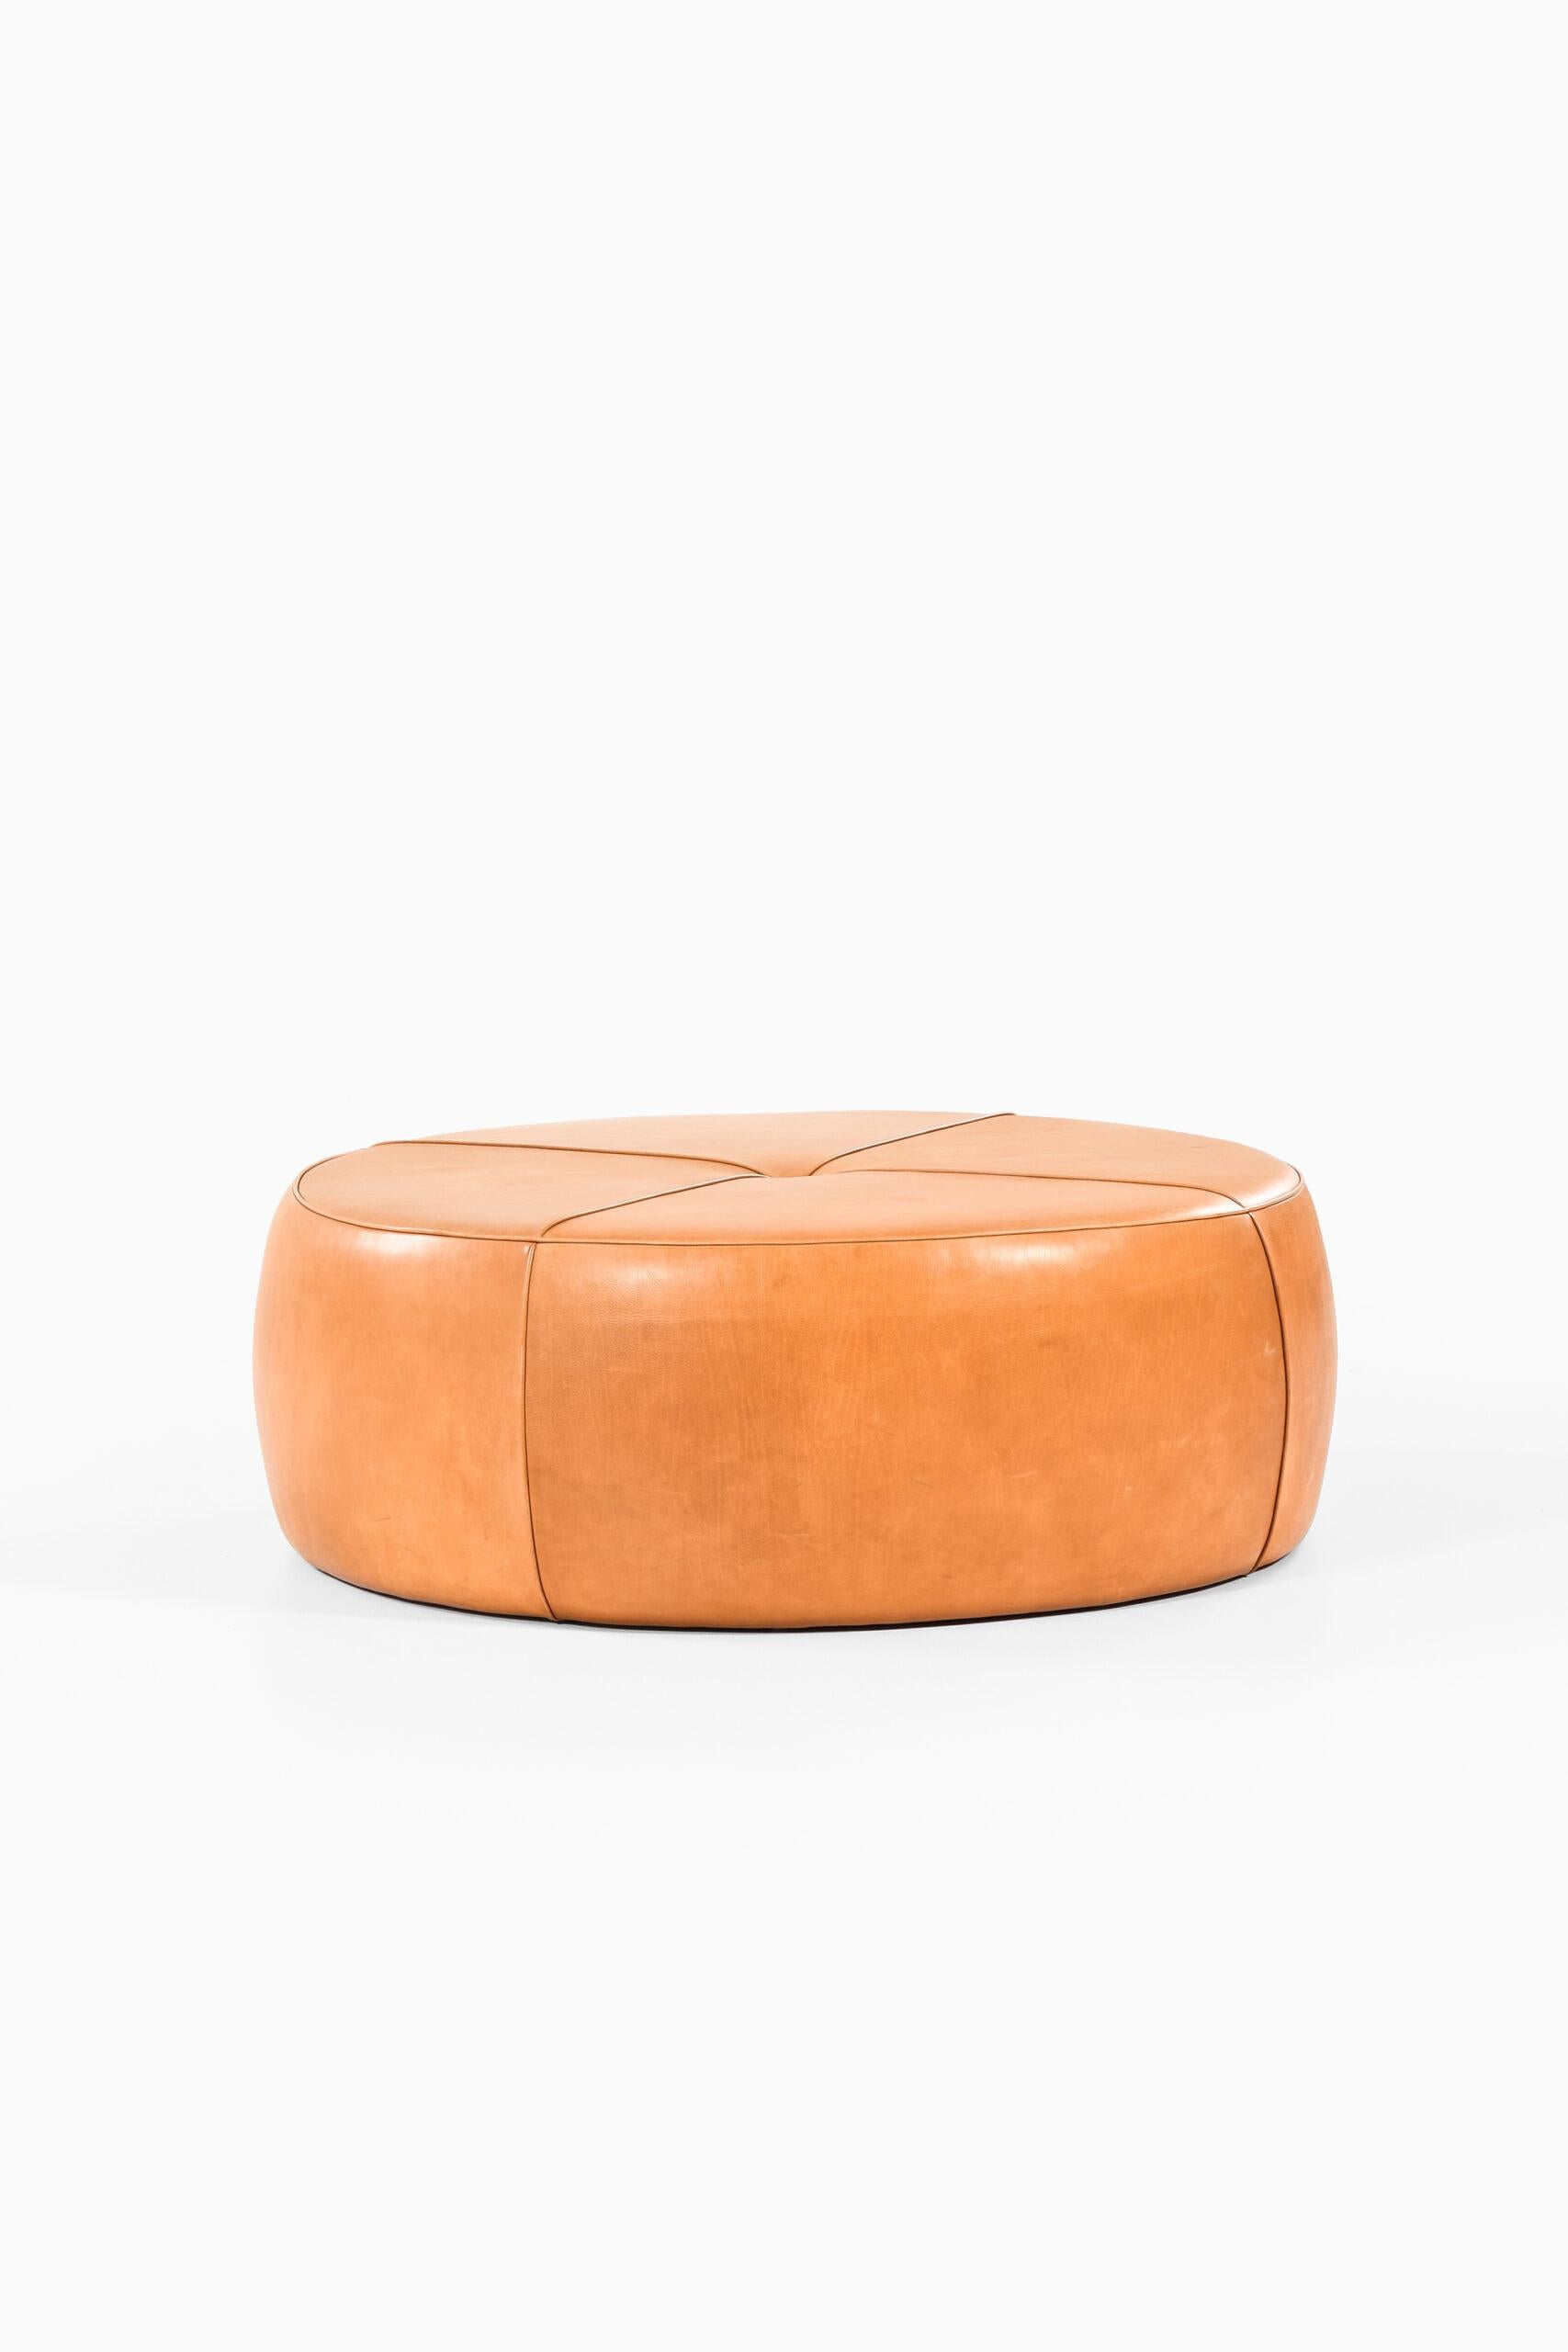 Rare and large pouf / stool by unknown designer. Produced in Denmark.